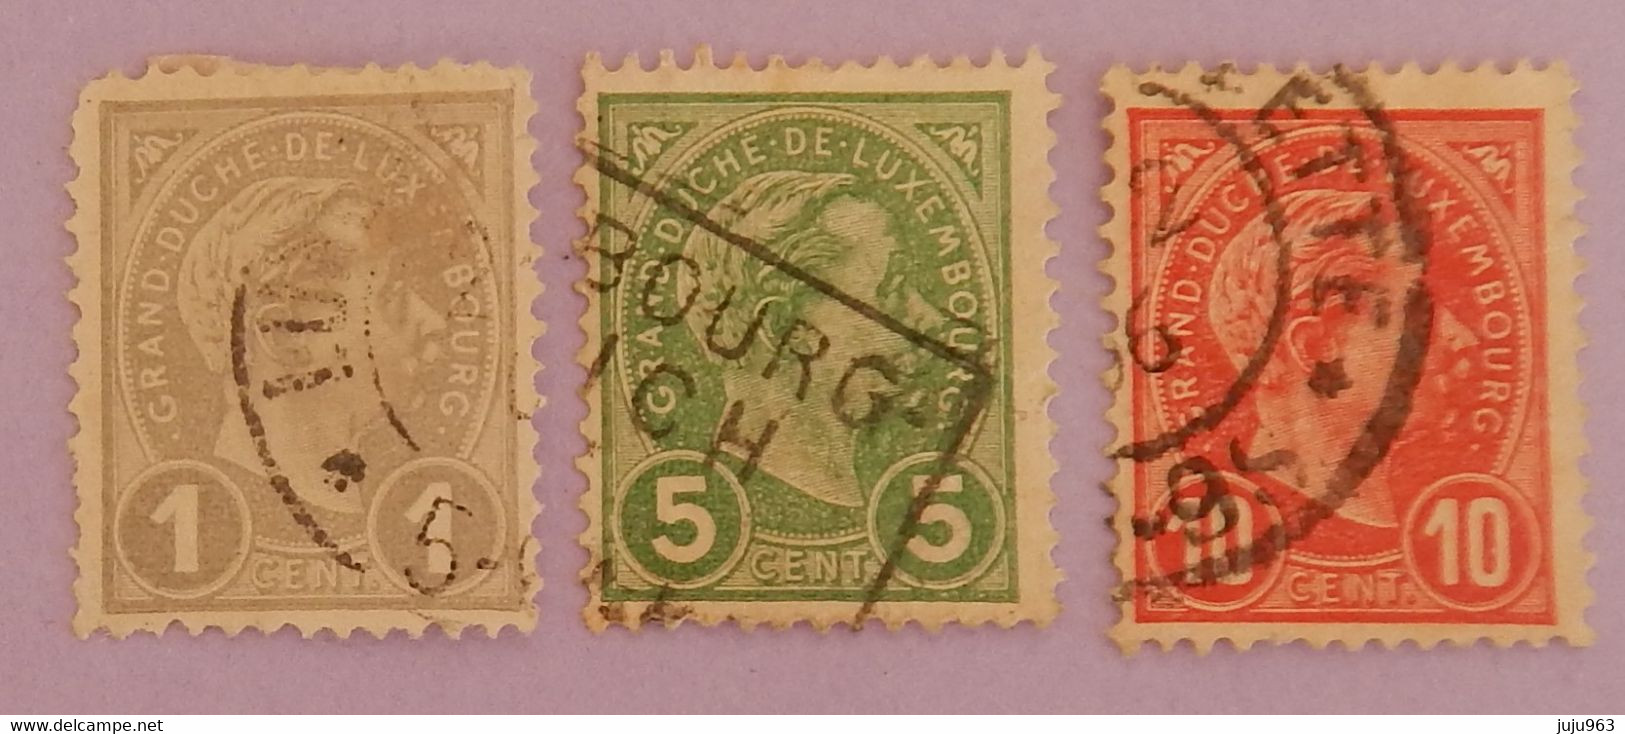 LUXEMBOURG  YT 69+72/73 OBLITERE "ADOLPHE 1ER"  ANNÉE 1895 - 1895 Adolphe Profil